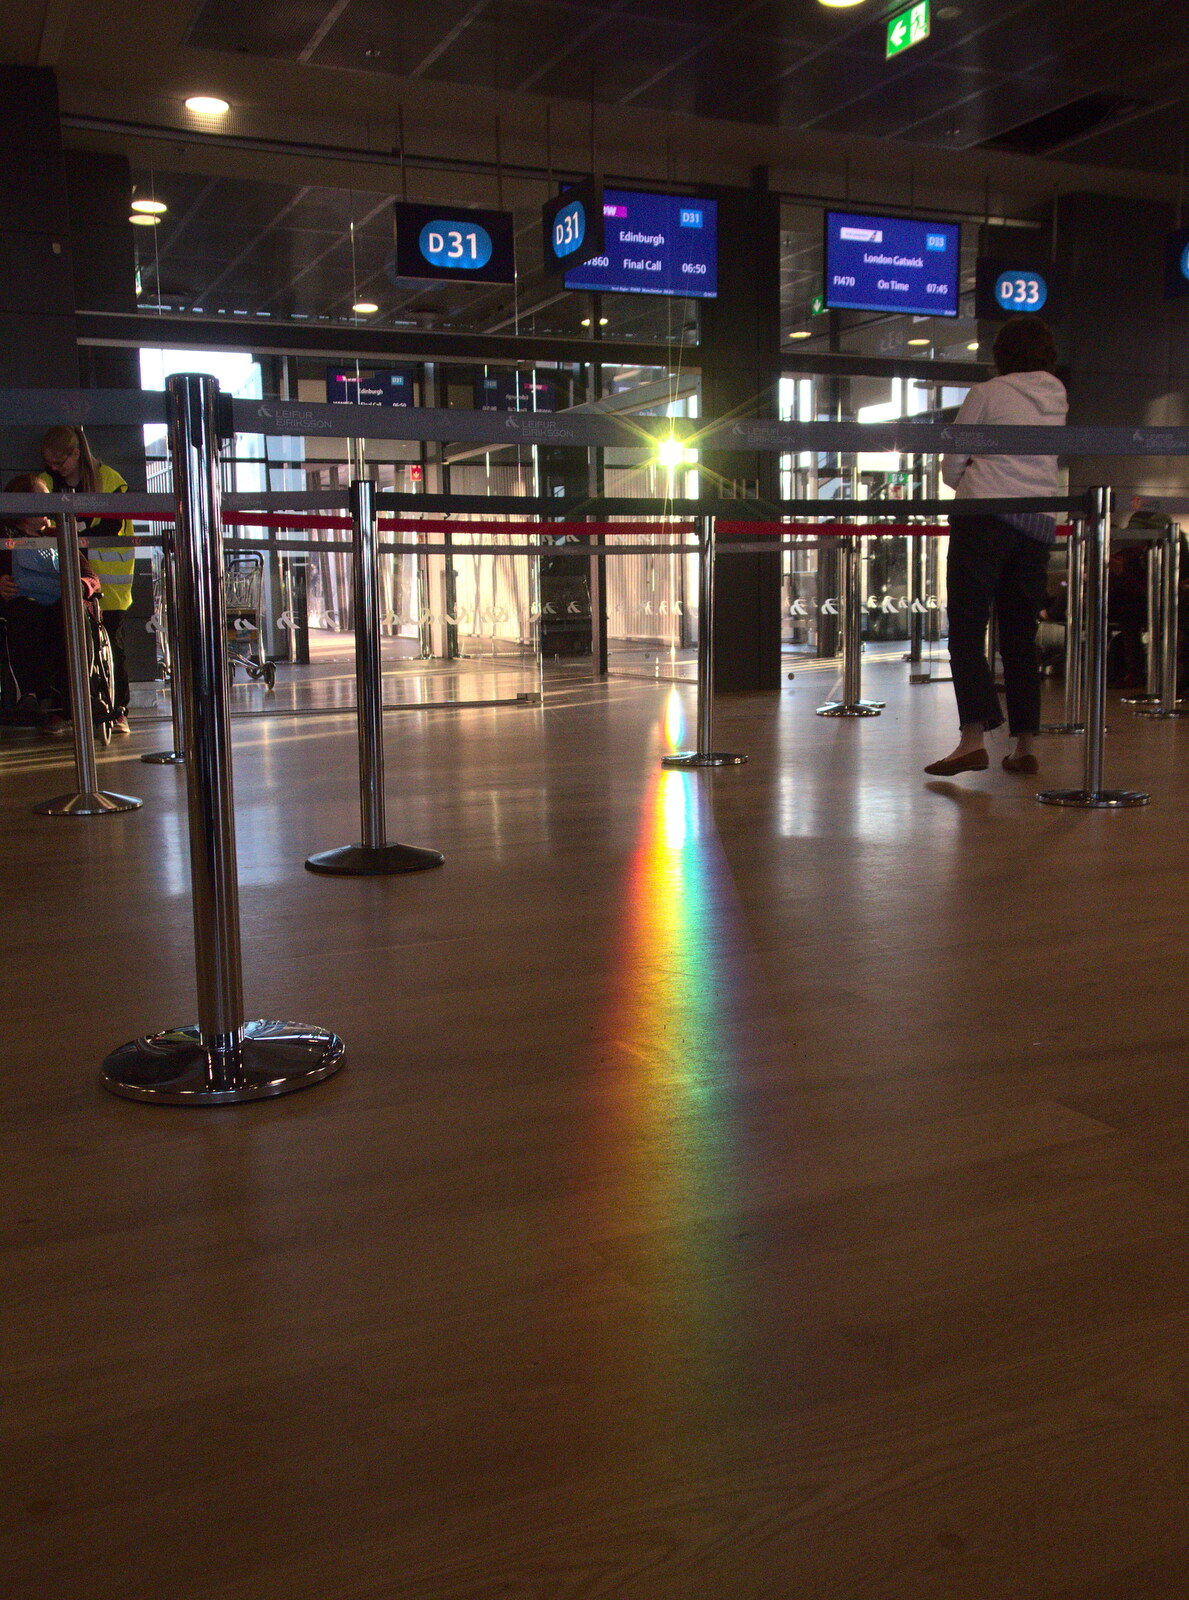 A rainbow of light at our departure gate from The Journey Home, Reykjavik, London and Brantham - 24th April 2017